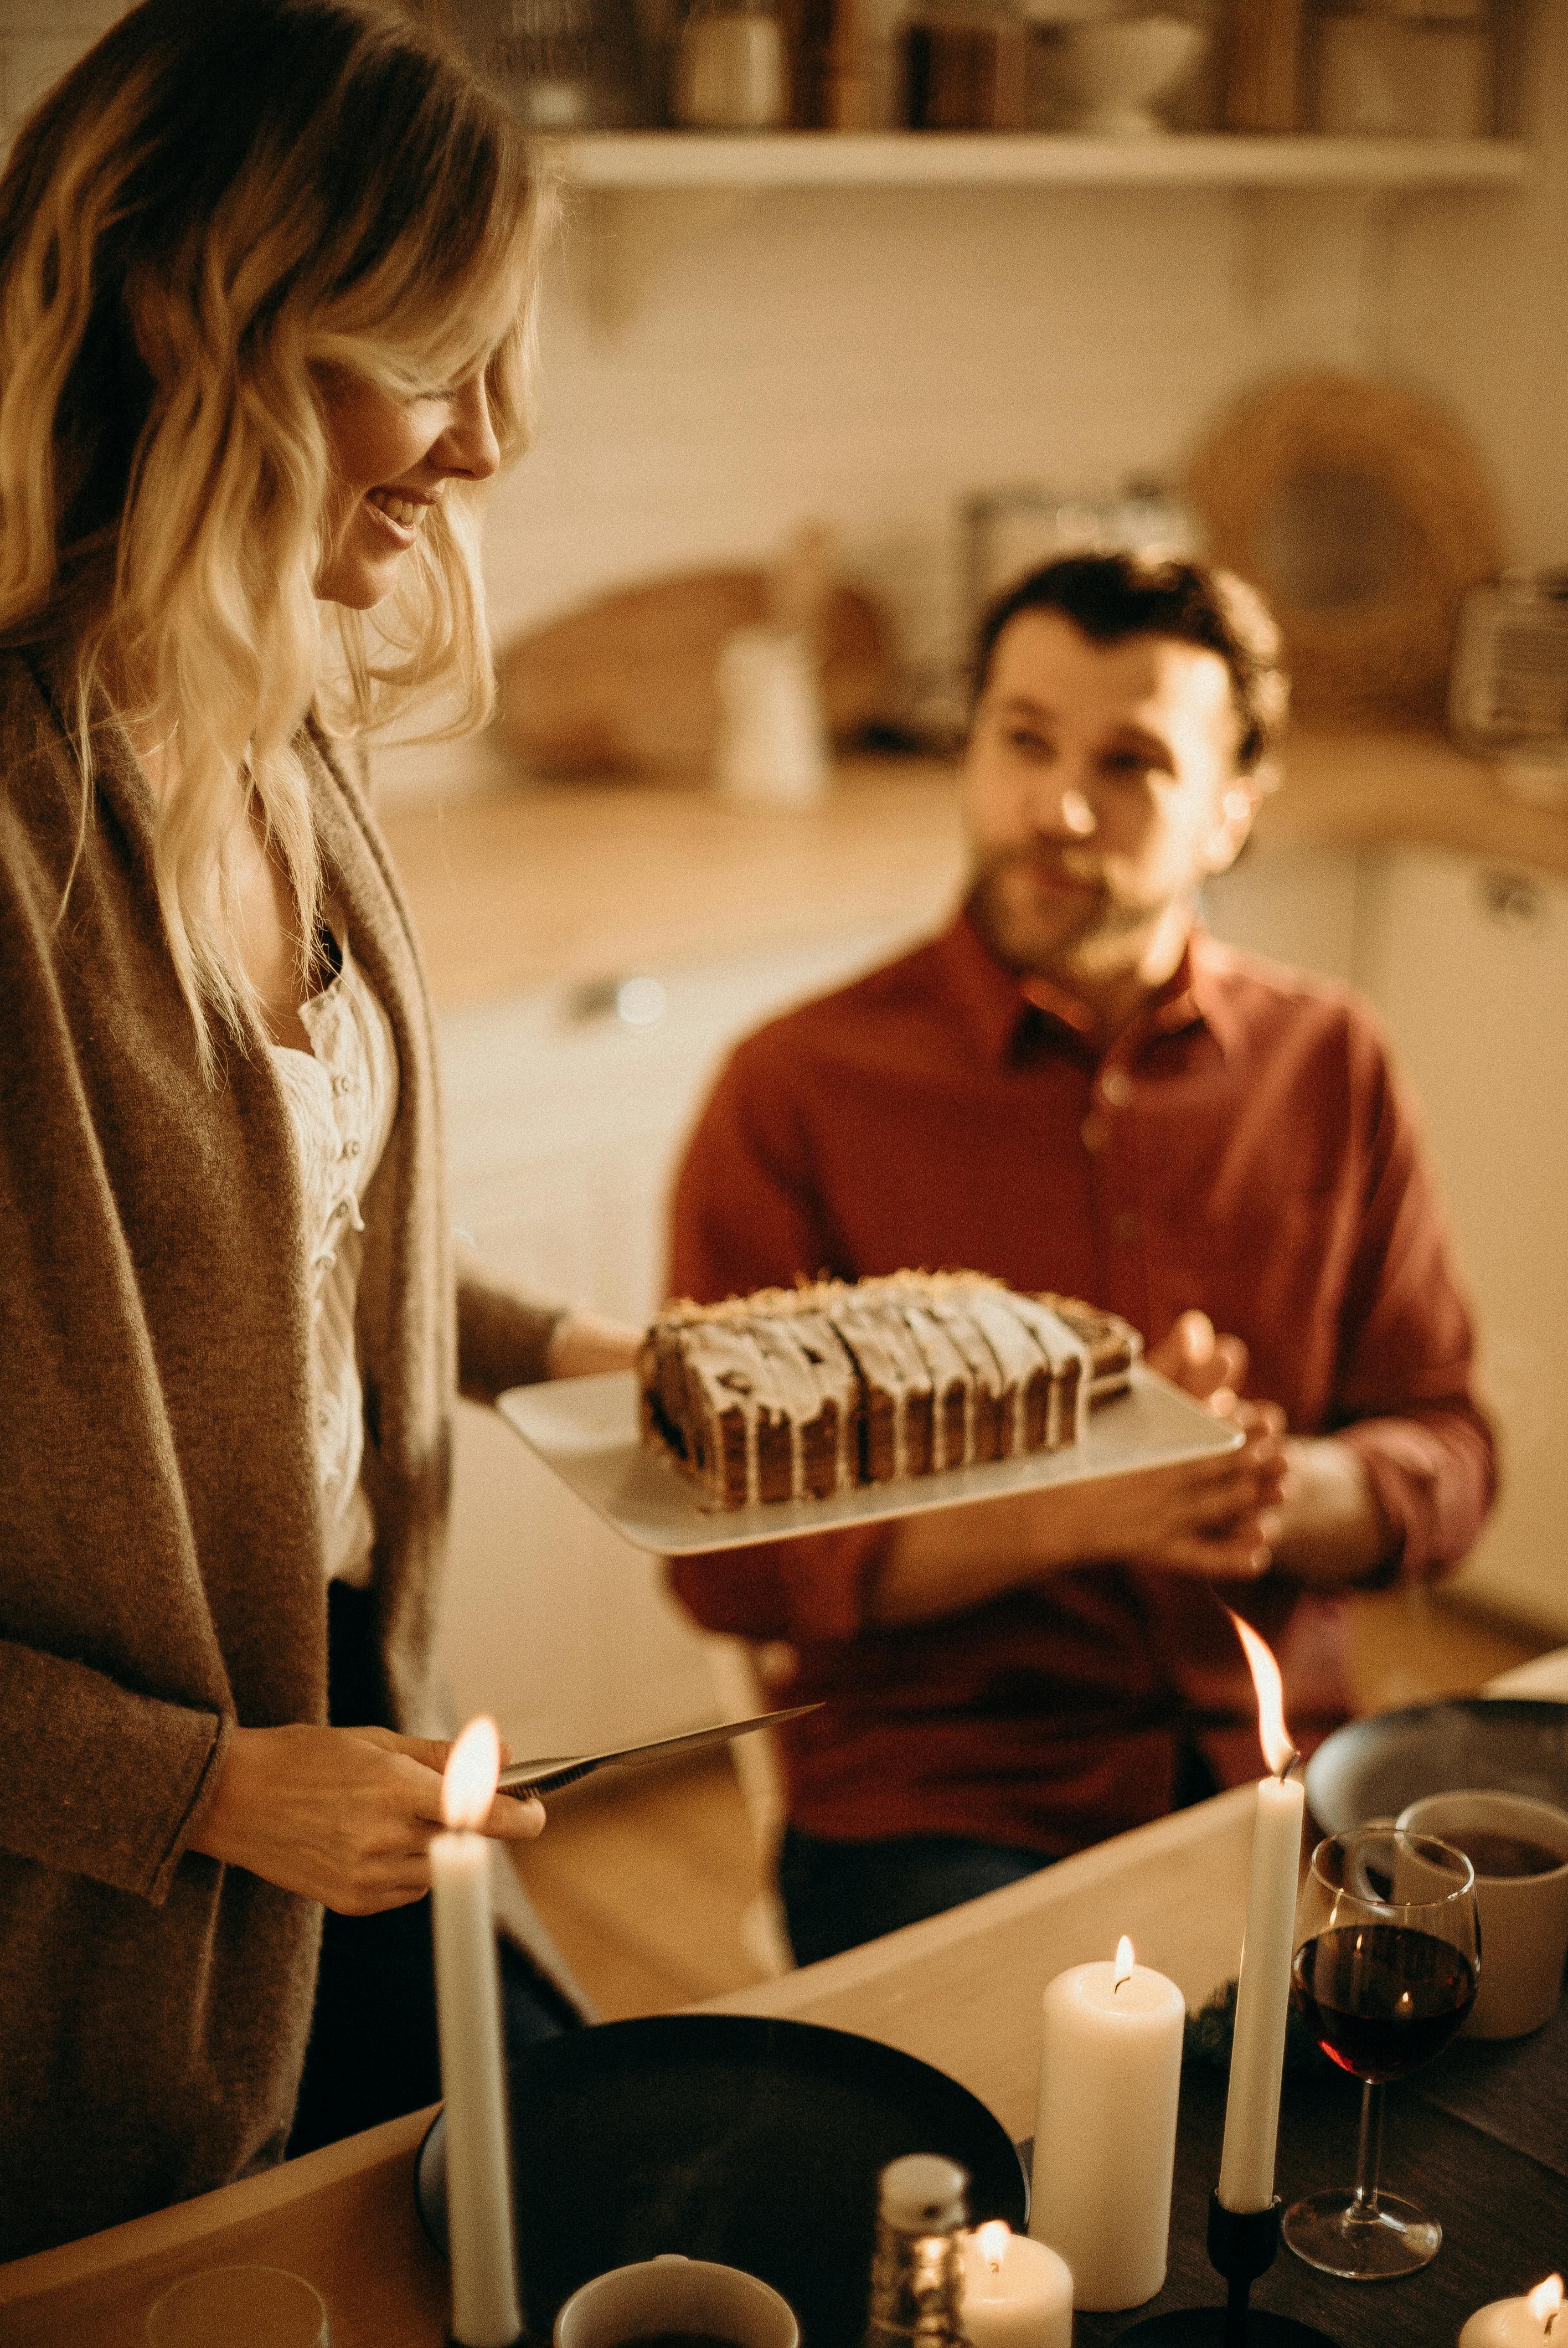 Woman standing while serving cake and the man sitting near a table. | Photo: Pexels